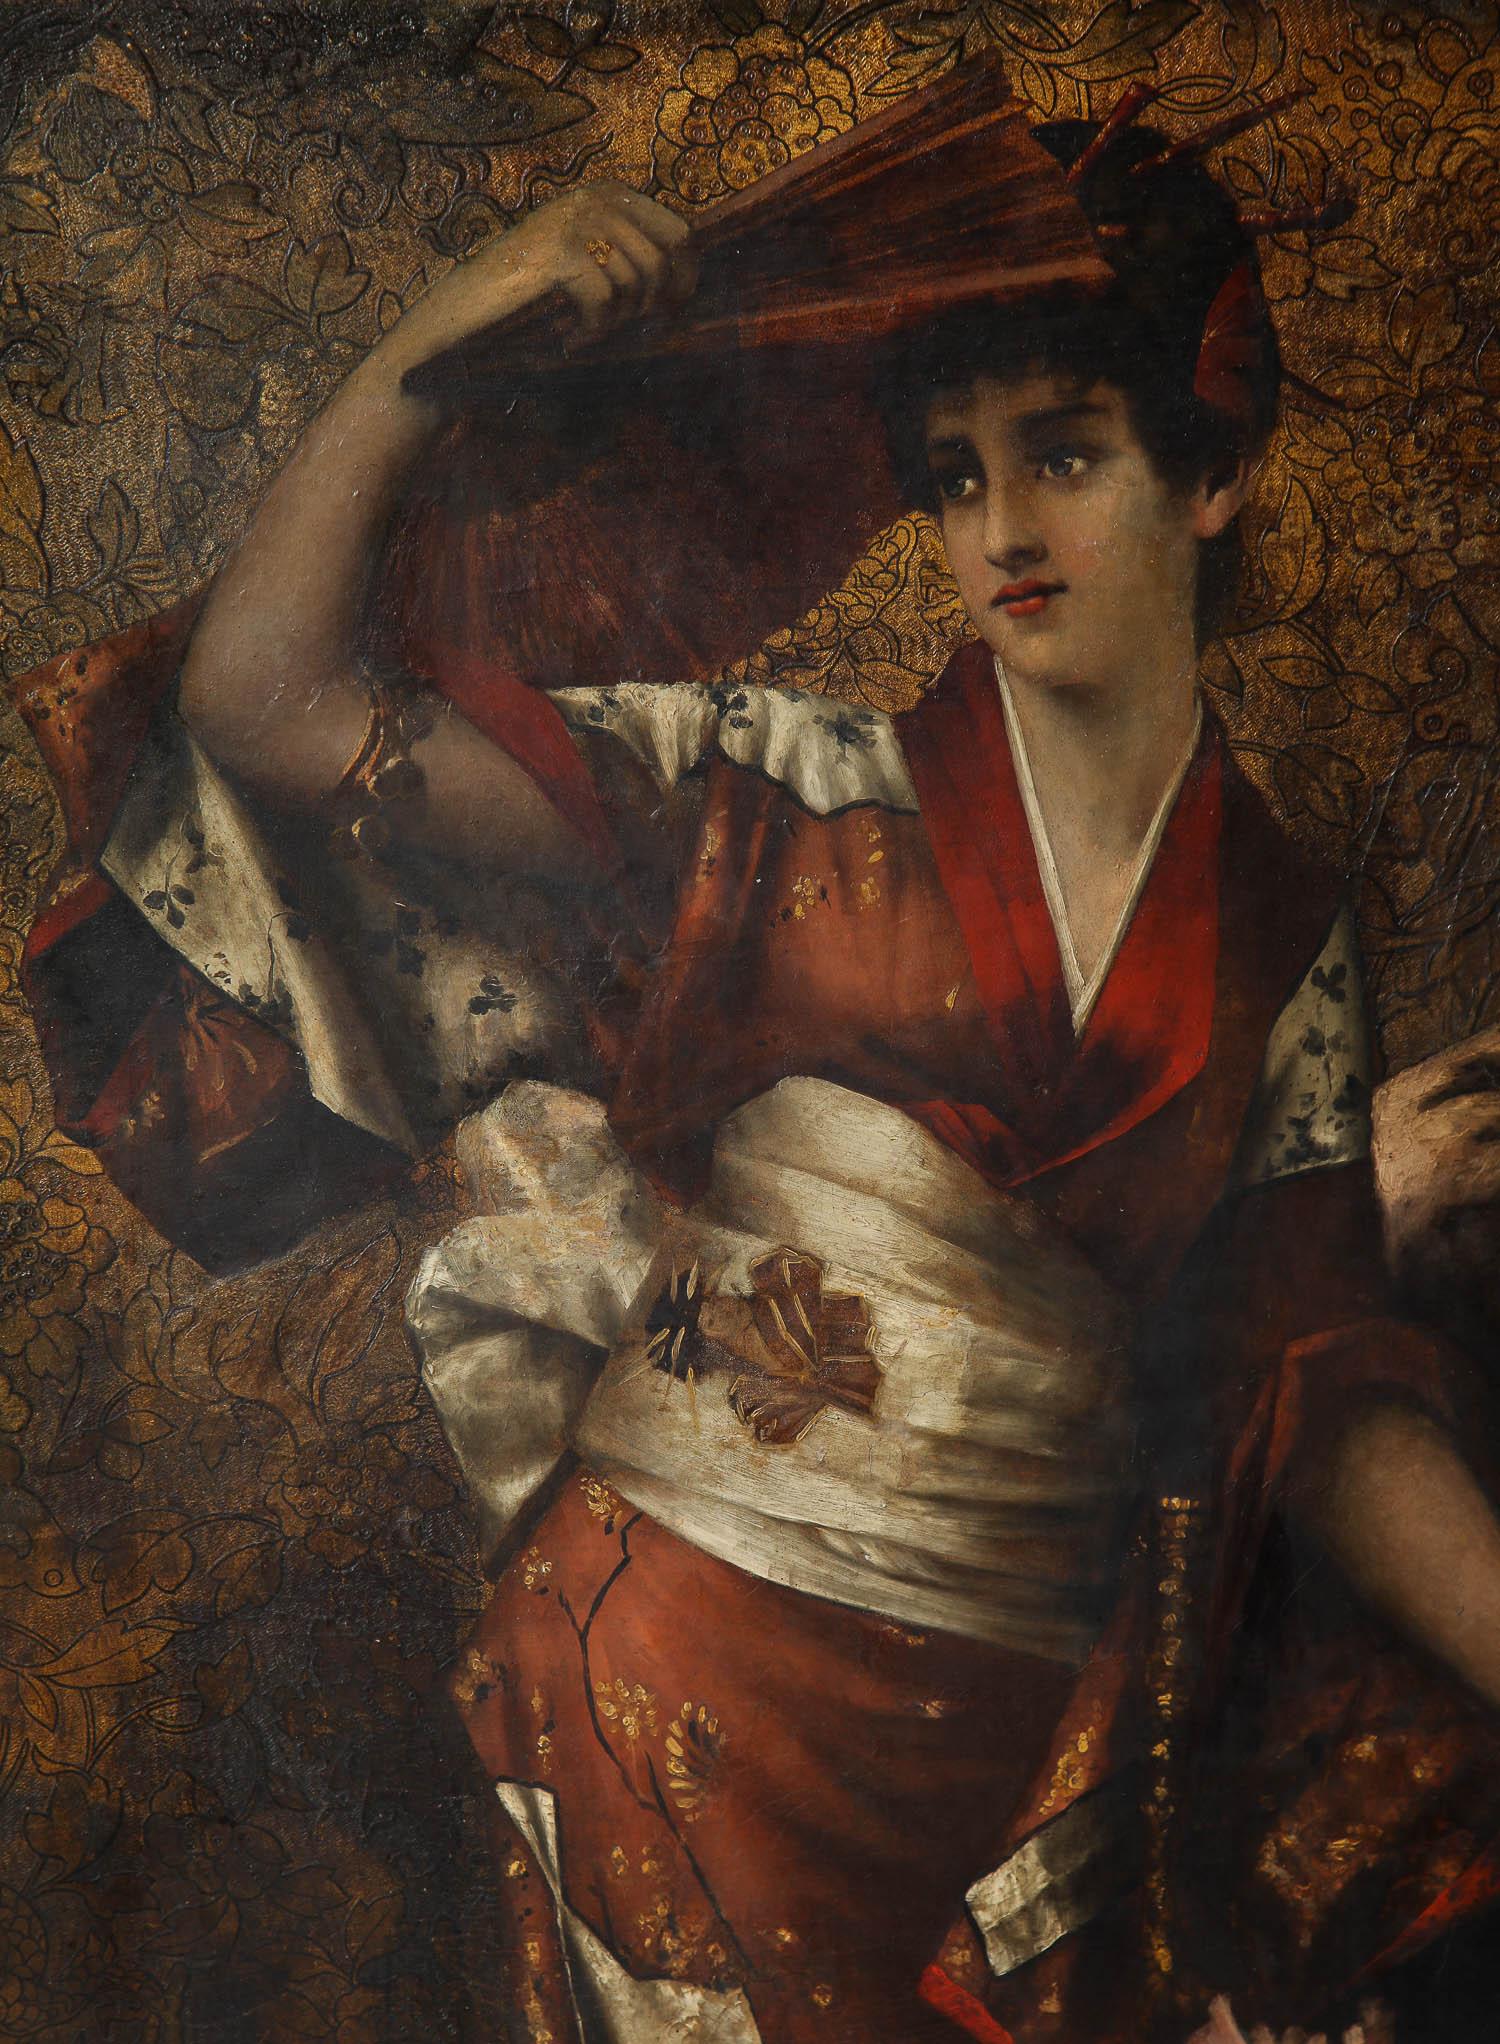 A beautiful 19th century French japonisme oil-on-canvas painting of a Geisha holding a fan. This beautiful Geisha is modeled after the Japonisme movement brought up by French artists integrating Japanese artistic styles into their art work. During